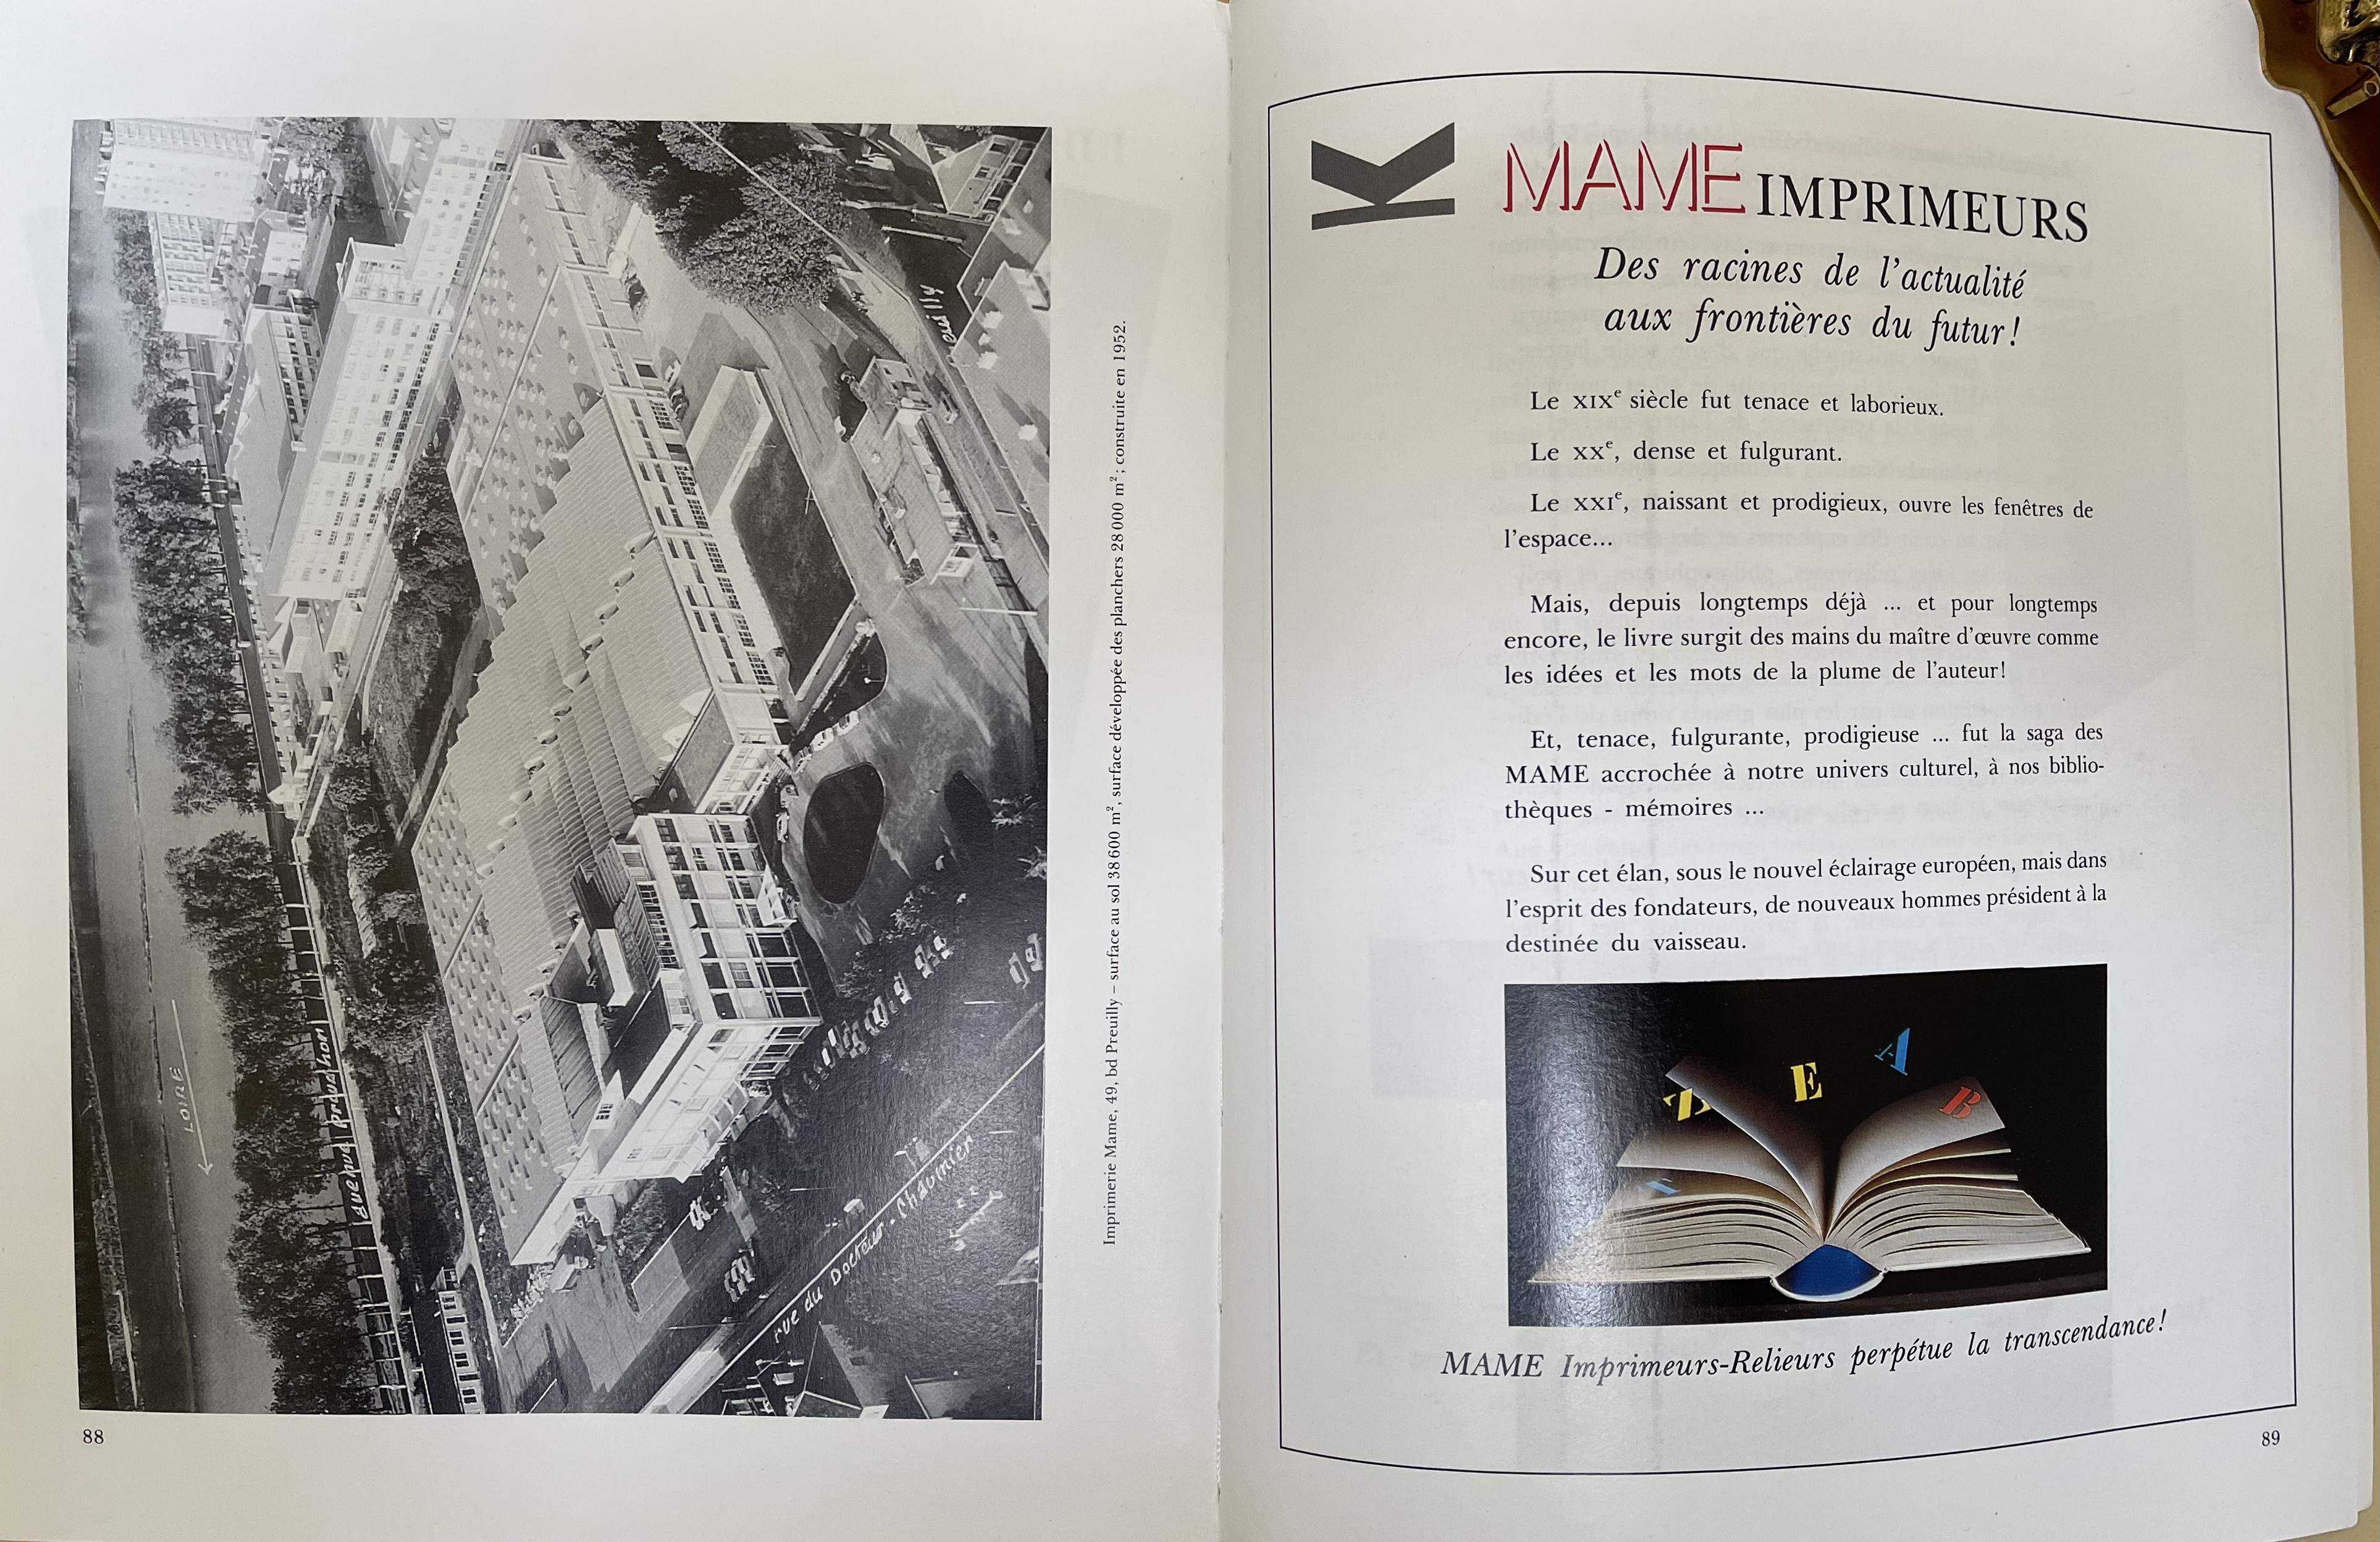 The modern production facility of Mame Imprimeurs as illustrated in their 1989 commemorative catalogue.